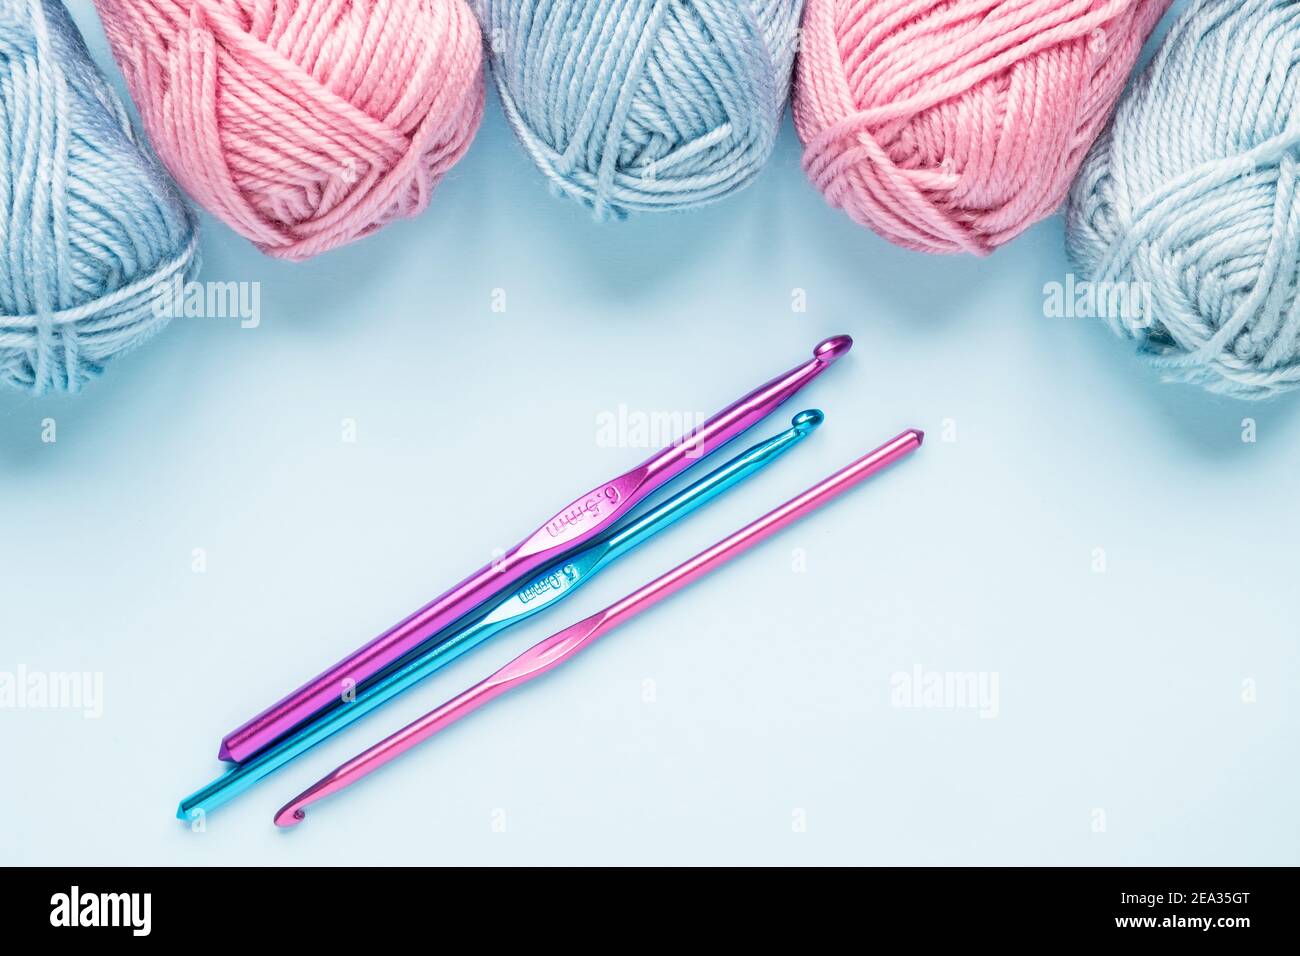 Multicolored crochet hooks with balls of yarn on a blue background. Stock Photo